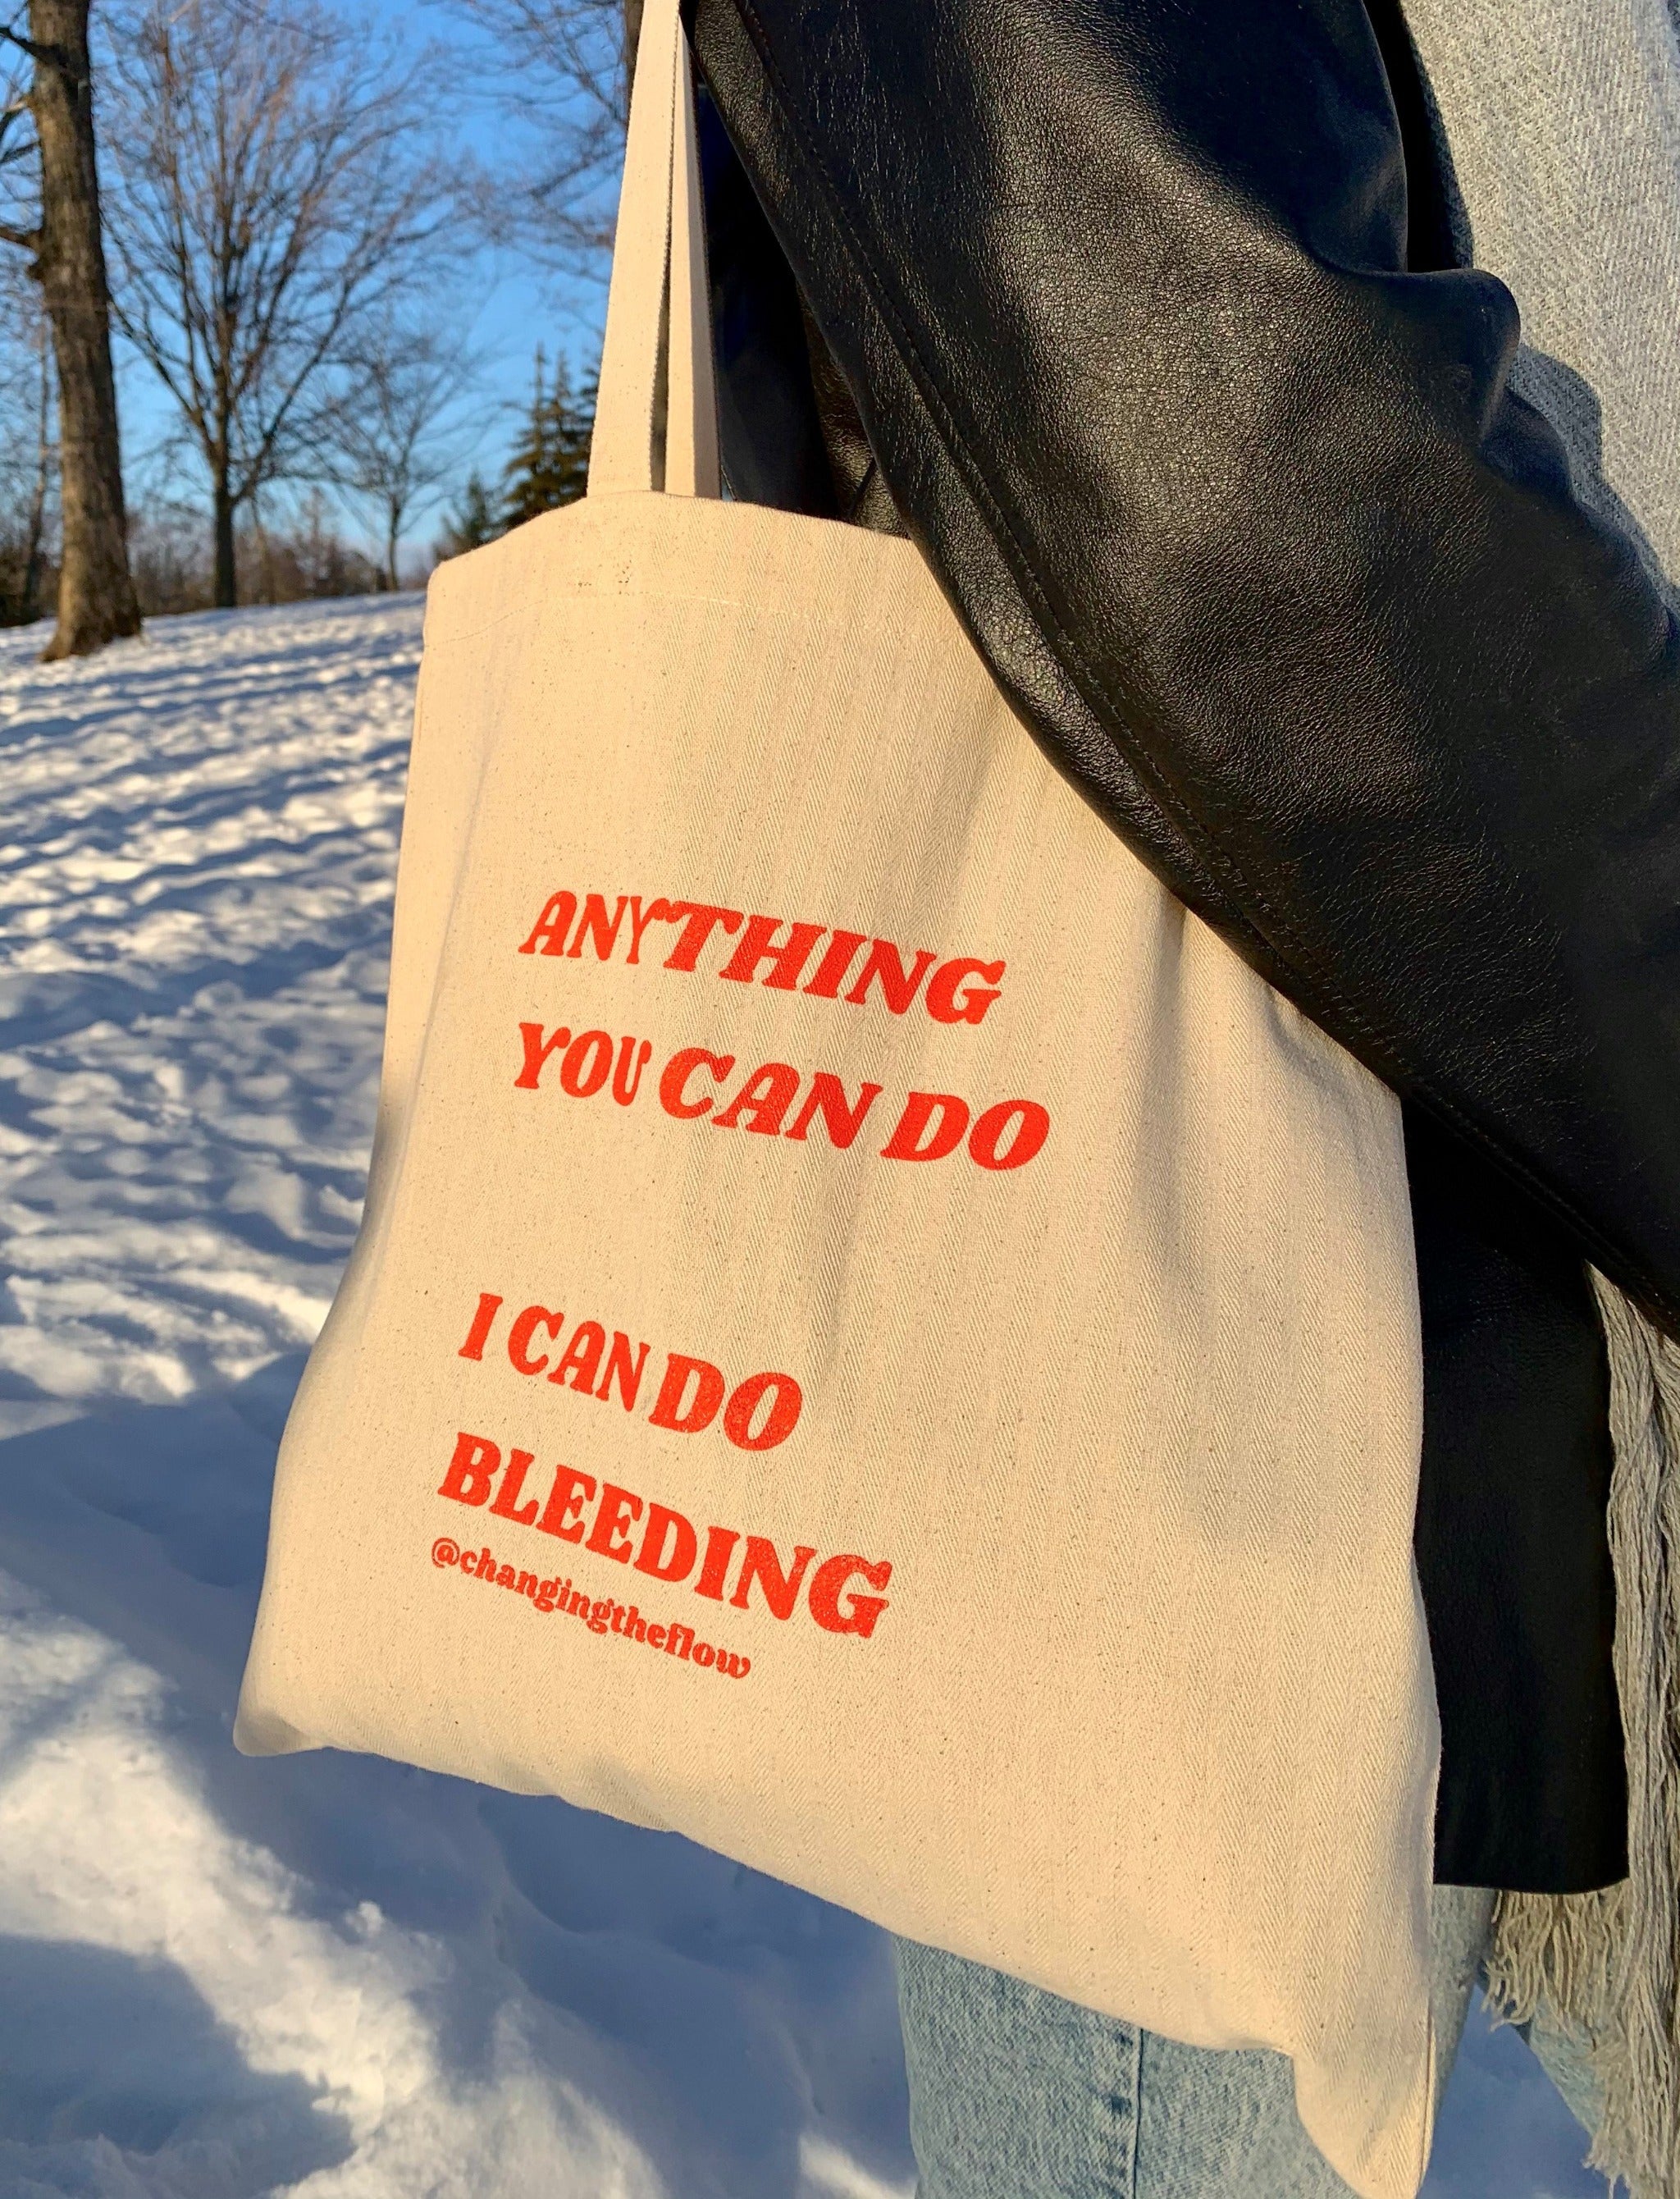 image of our canvas totes that says Anything You Can Do I Can Do Bleeding shown hanging on someone's shoulder, with snow on the ground in the background